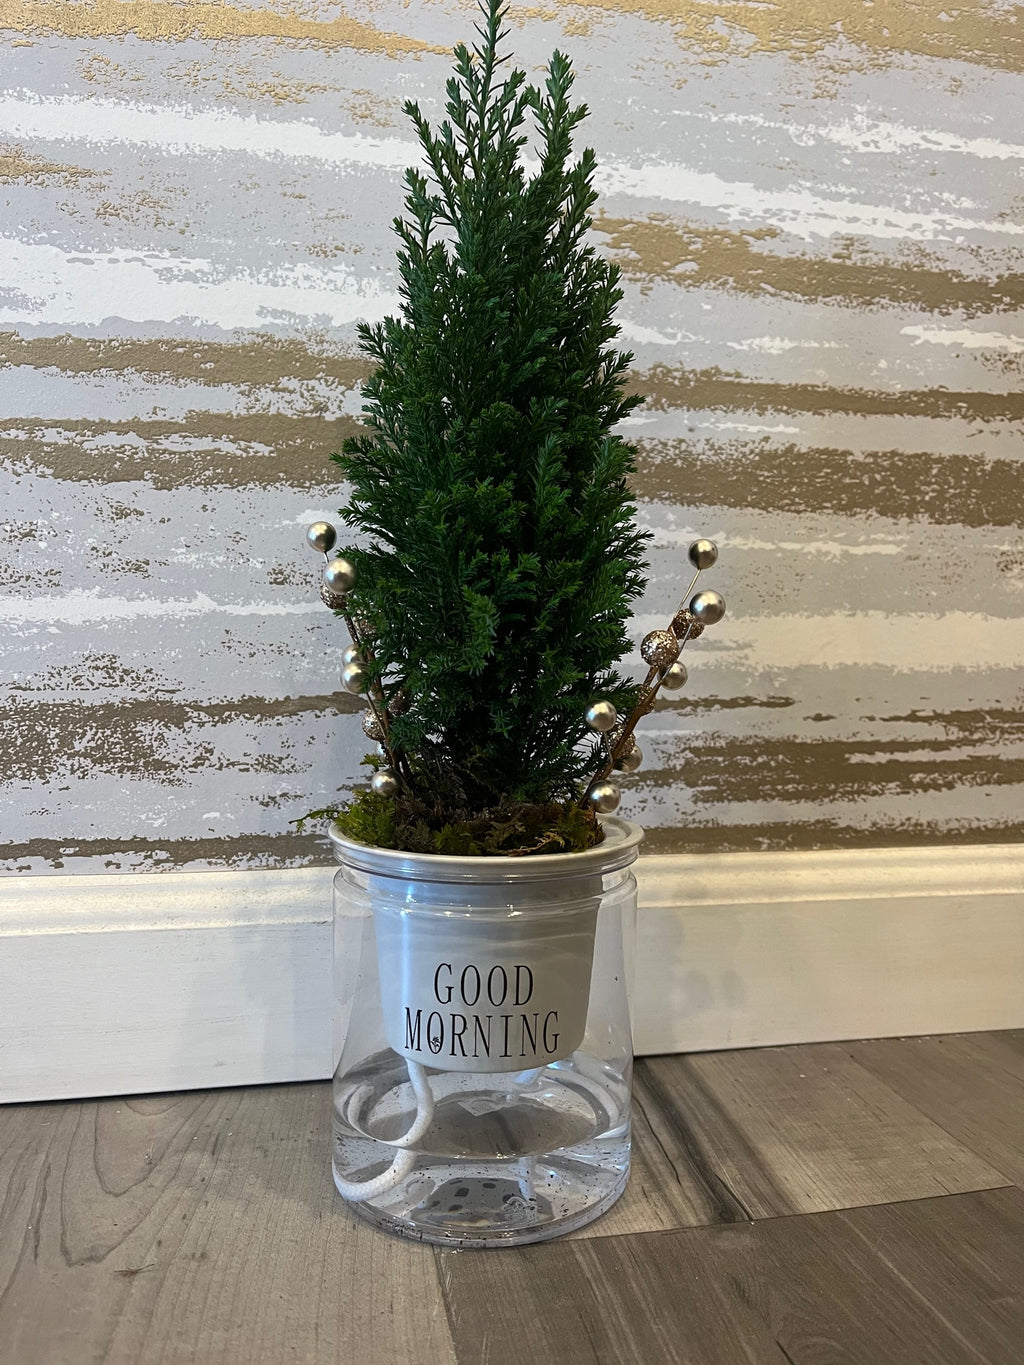 GOOD MORNING? SELF WATERING CHRISTMAS TREE DECORATED